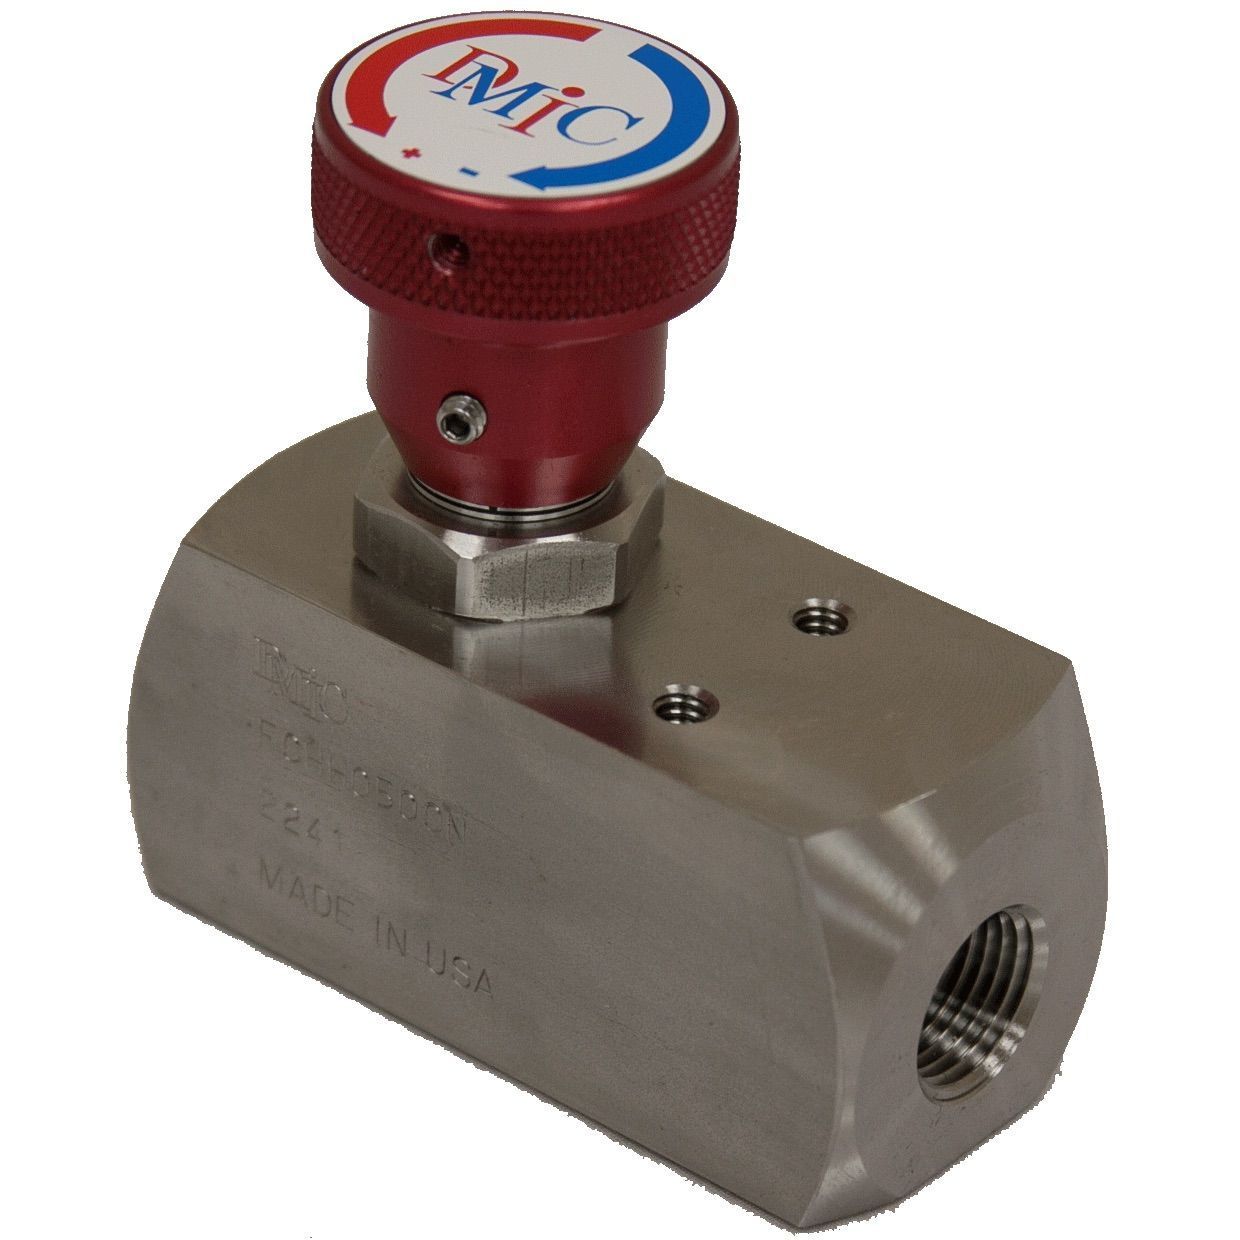 FCHH-1000N-1141 : DMIC Flow Control, Unidirectional, with Integrated Check, 1" NPT, Carbon Steel, 10000psi